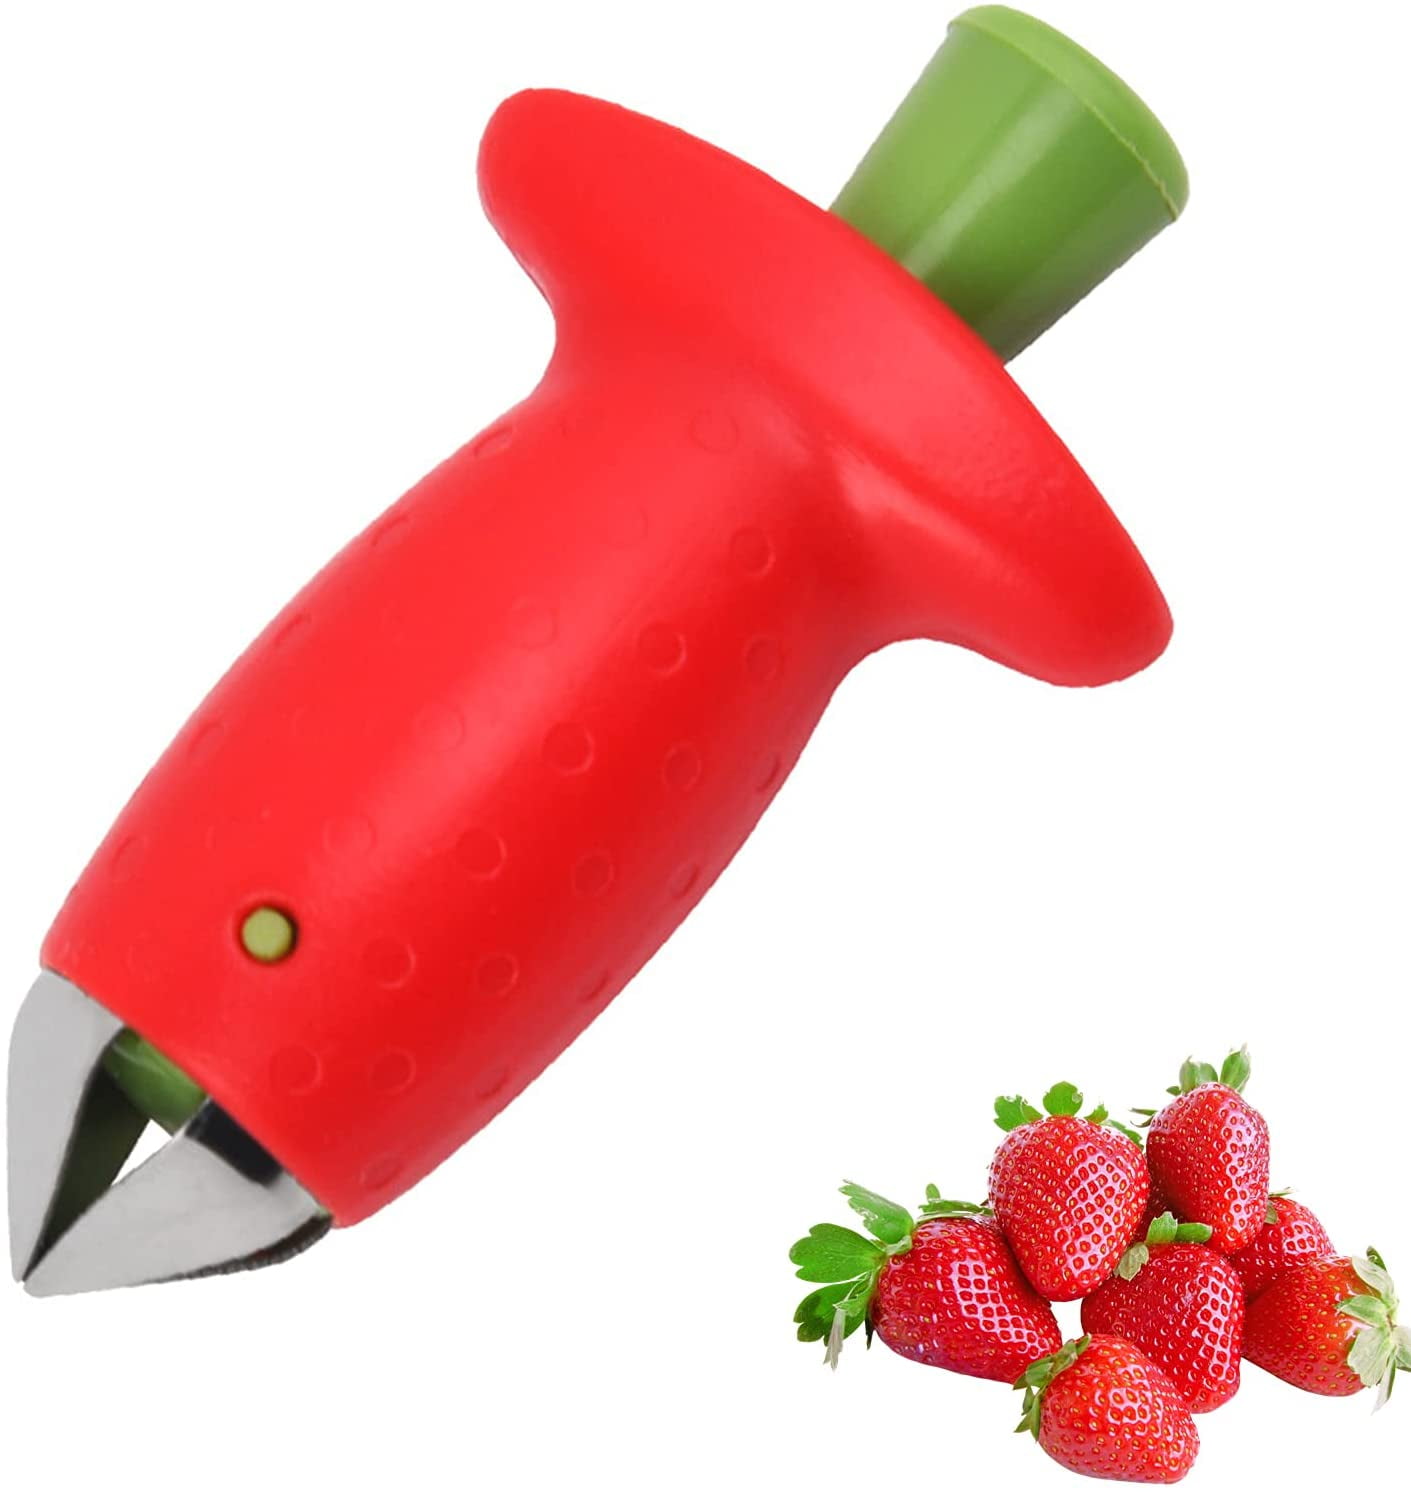 Kitchen Strawberry Paring Knife Stainless Steel Strawberry Peeler ...